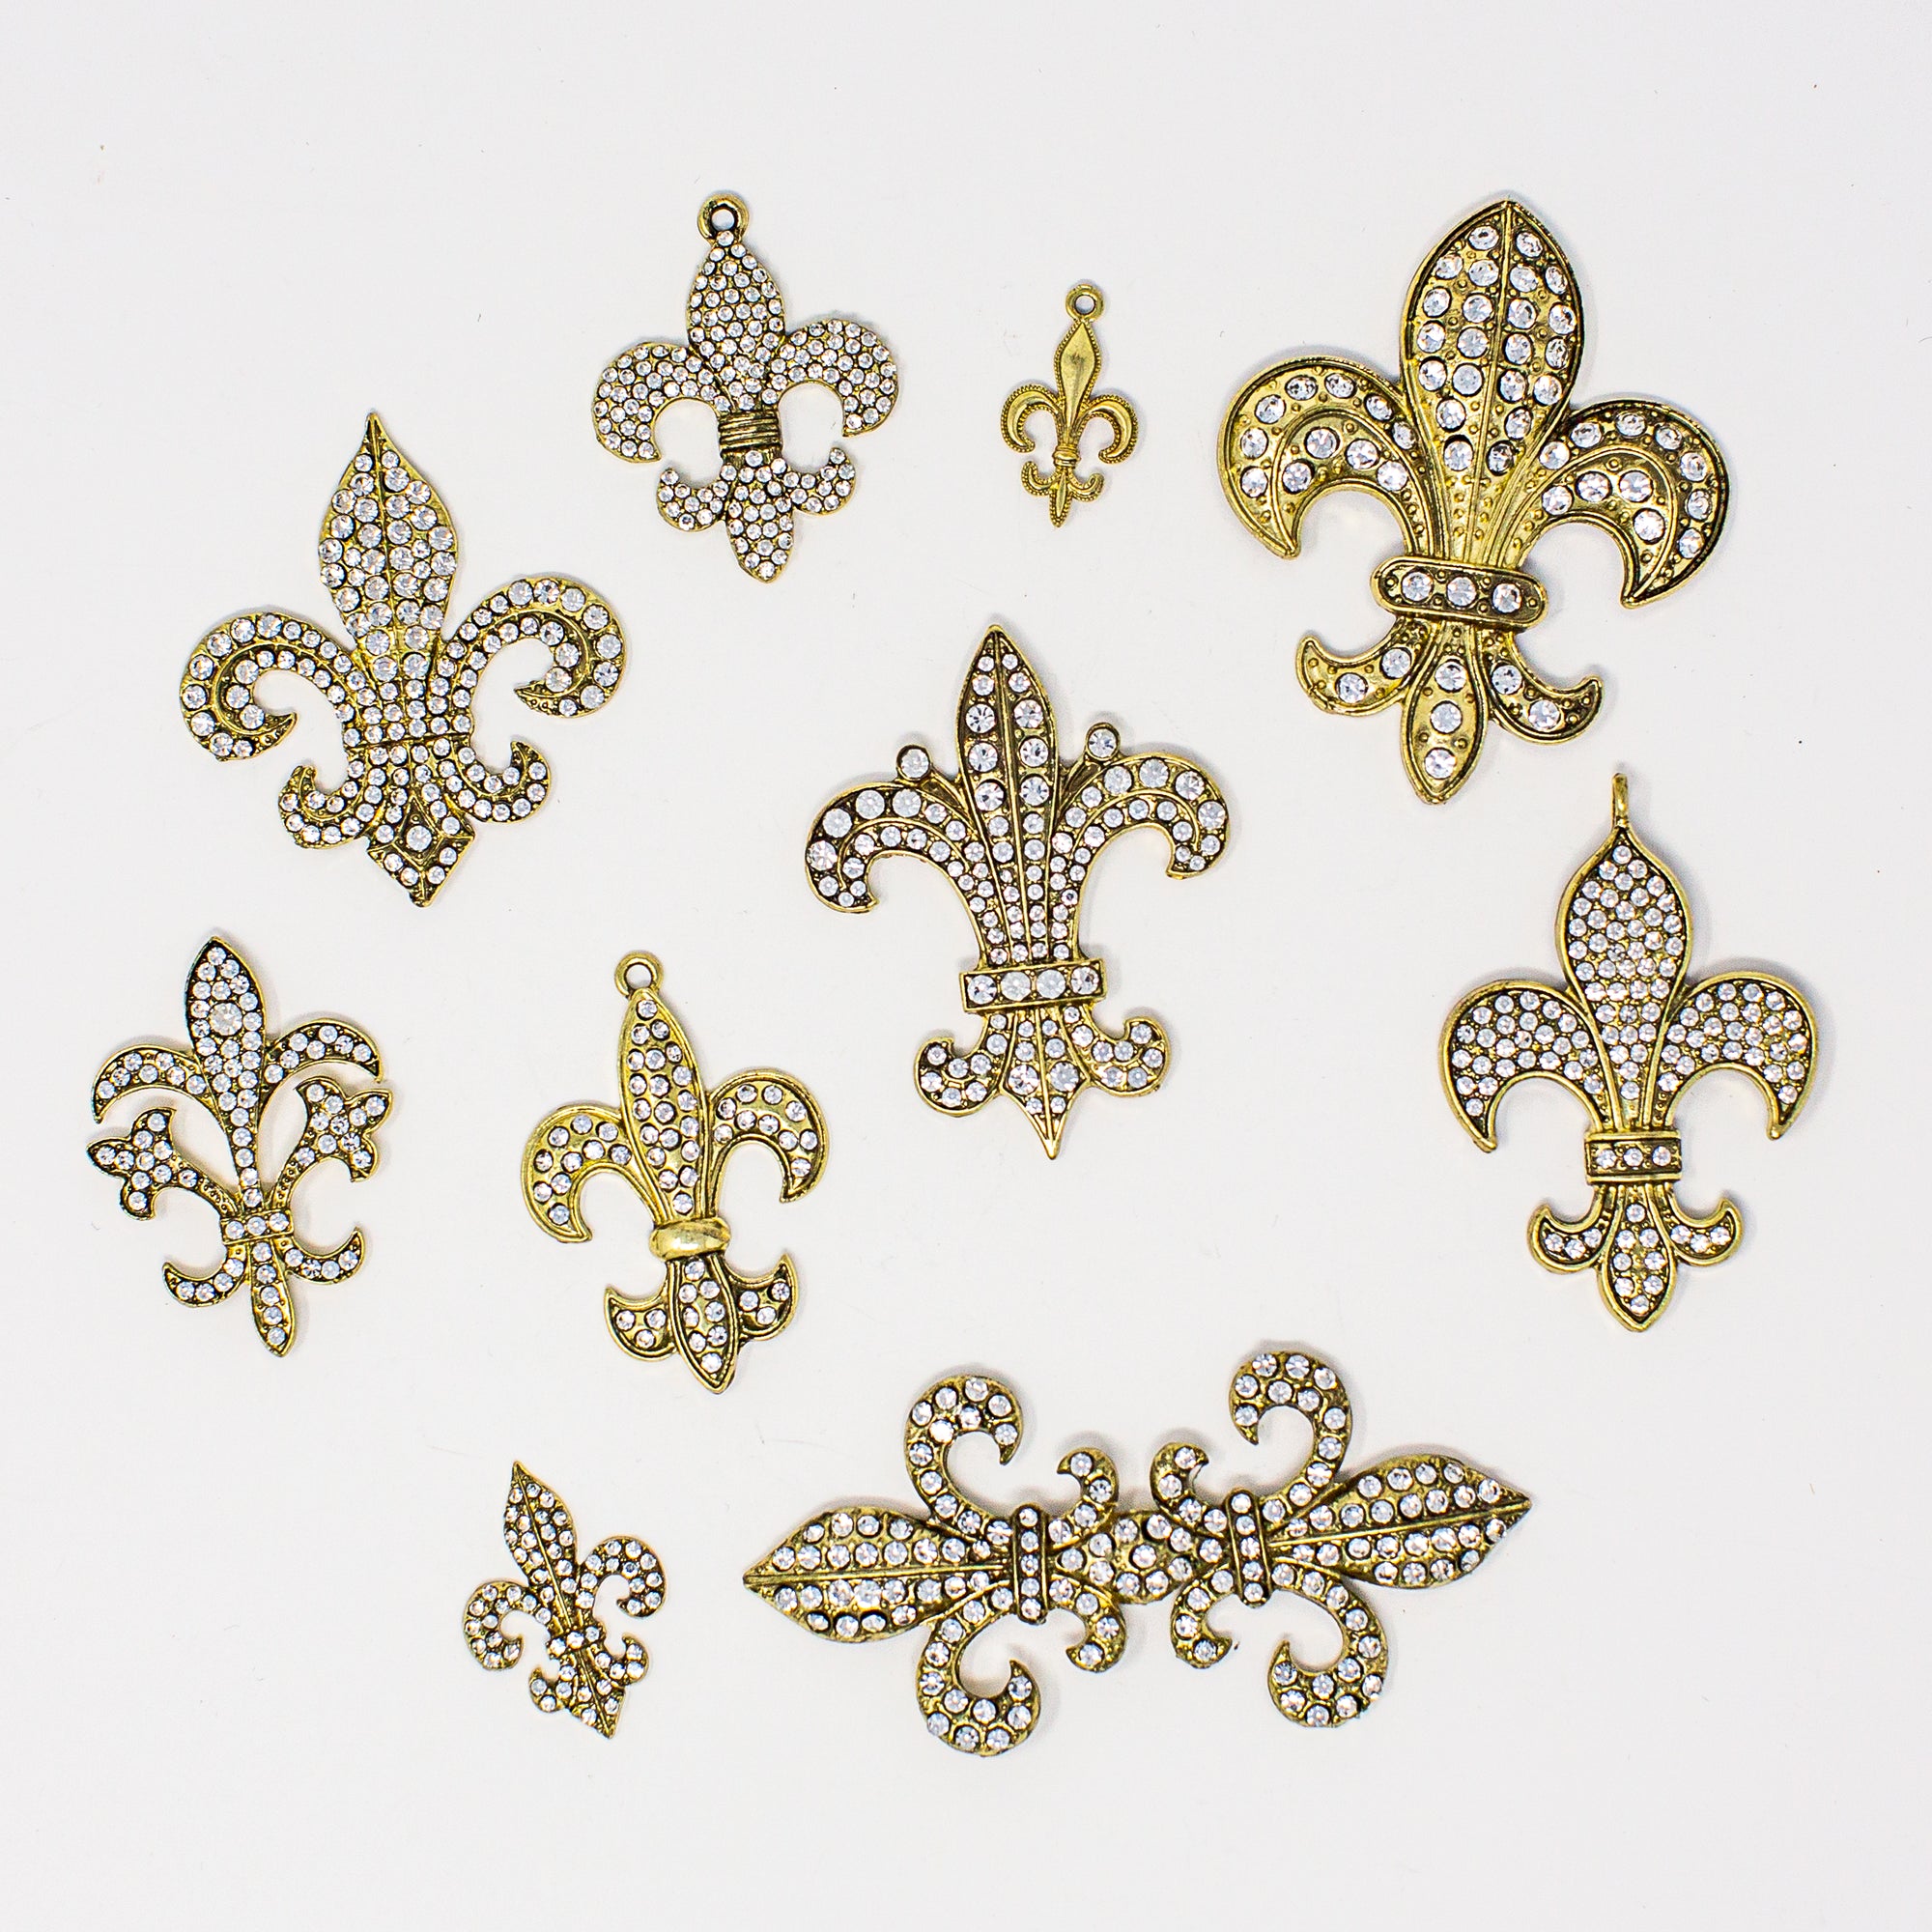 fleur de lis embellishments for crafts and diy french style bling embellishments antique bronze